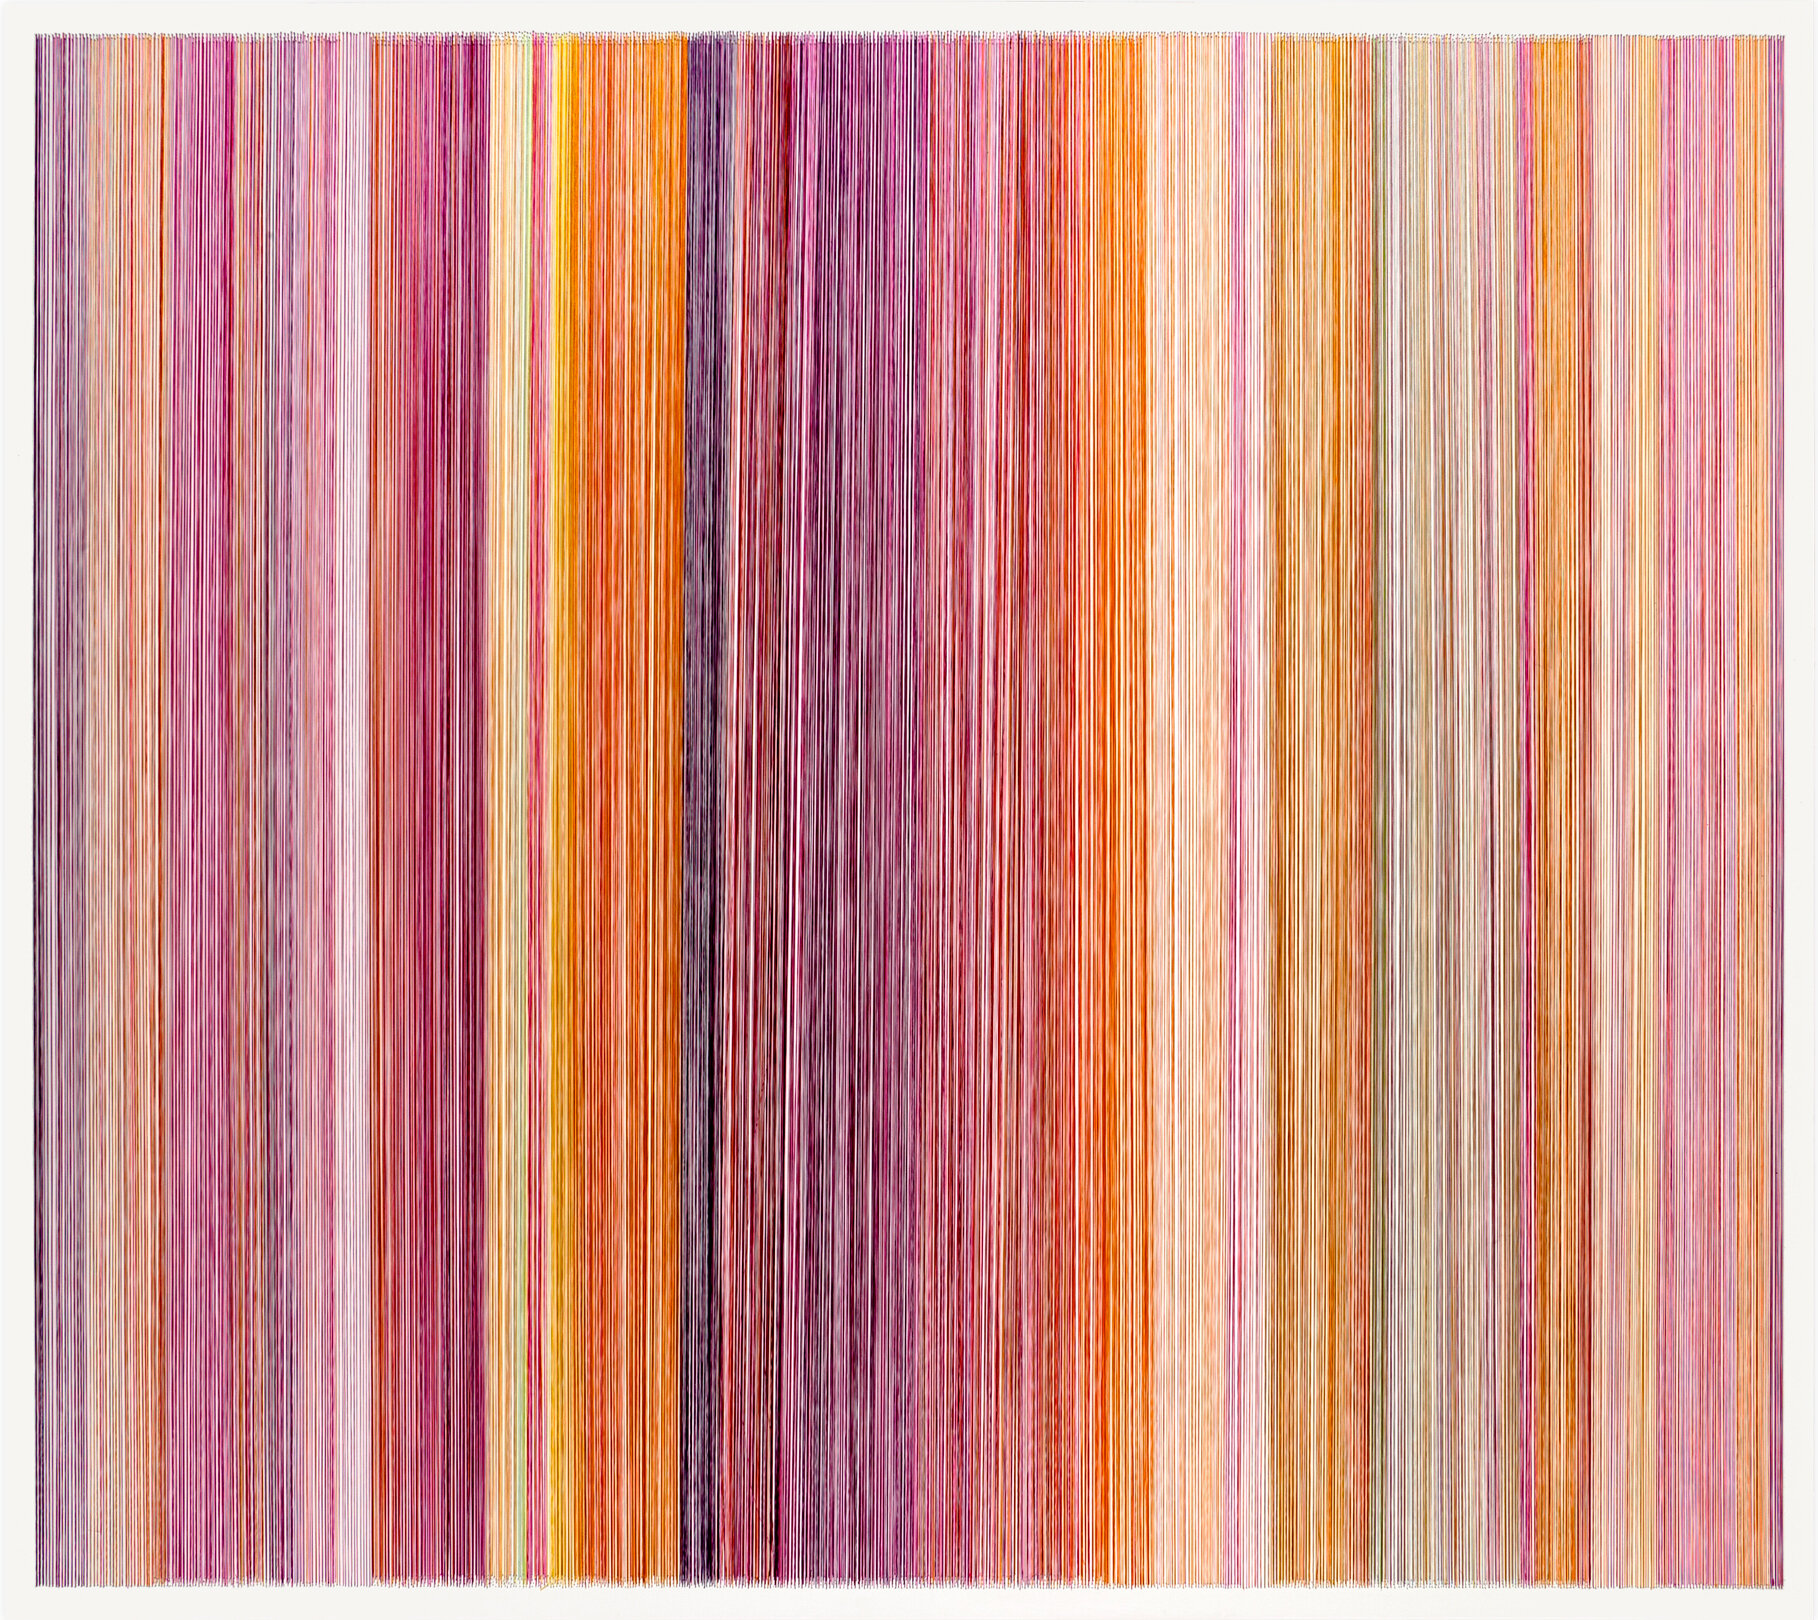    thread drawing 06   2011 rayon thread 51 by 58 inches private collection, Kansas City, MO 